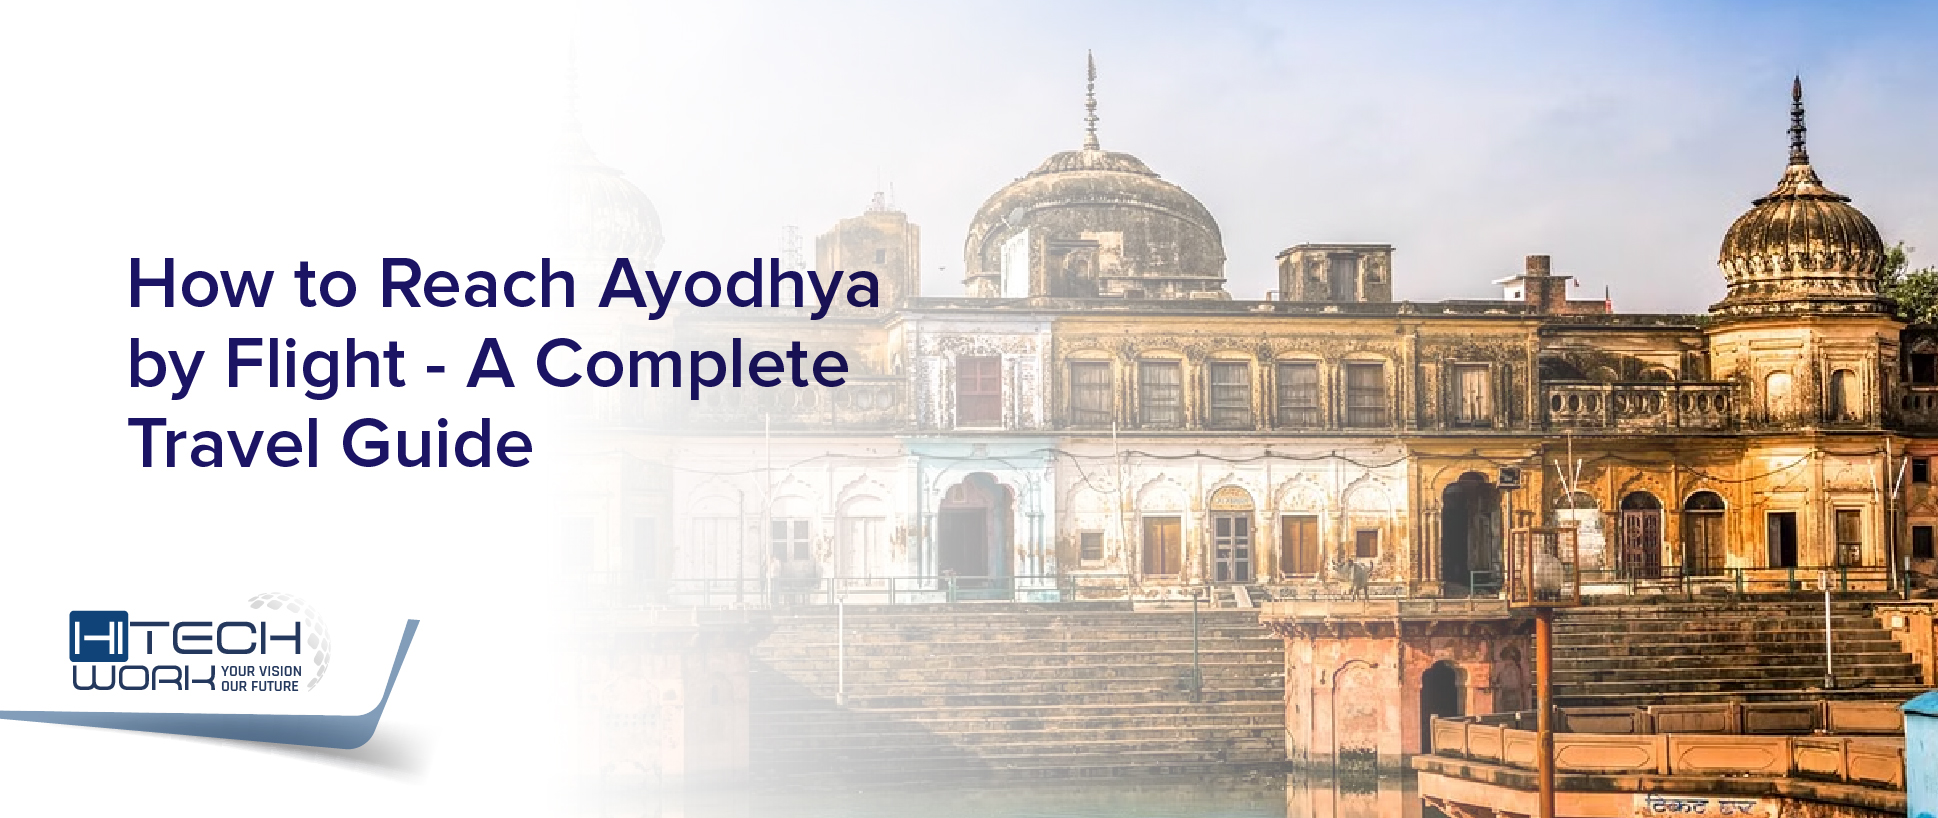 How to Reach Ayodhya by Flight